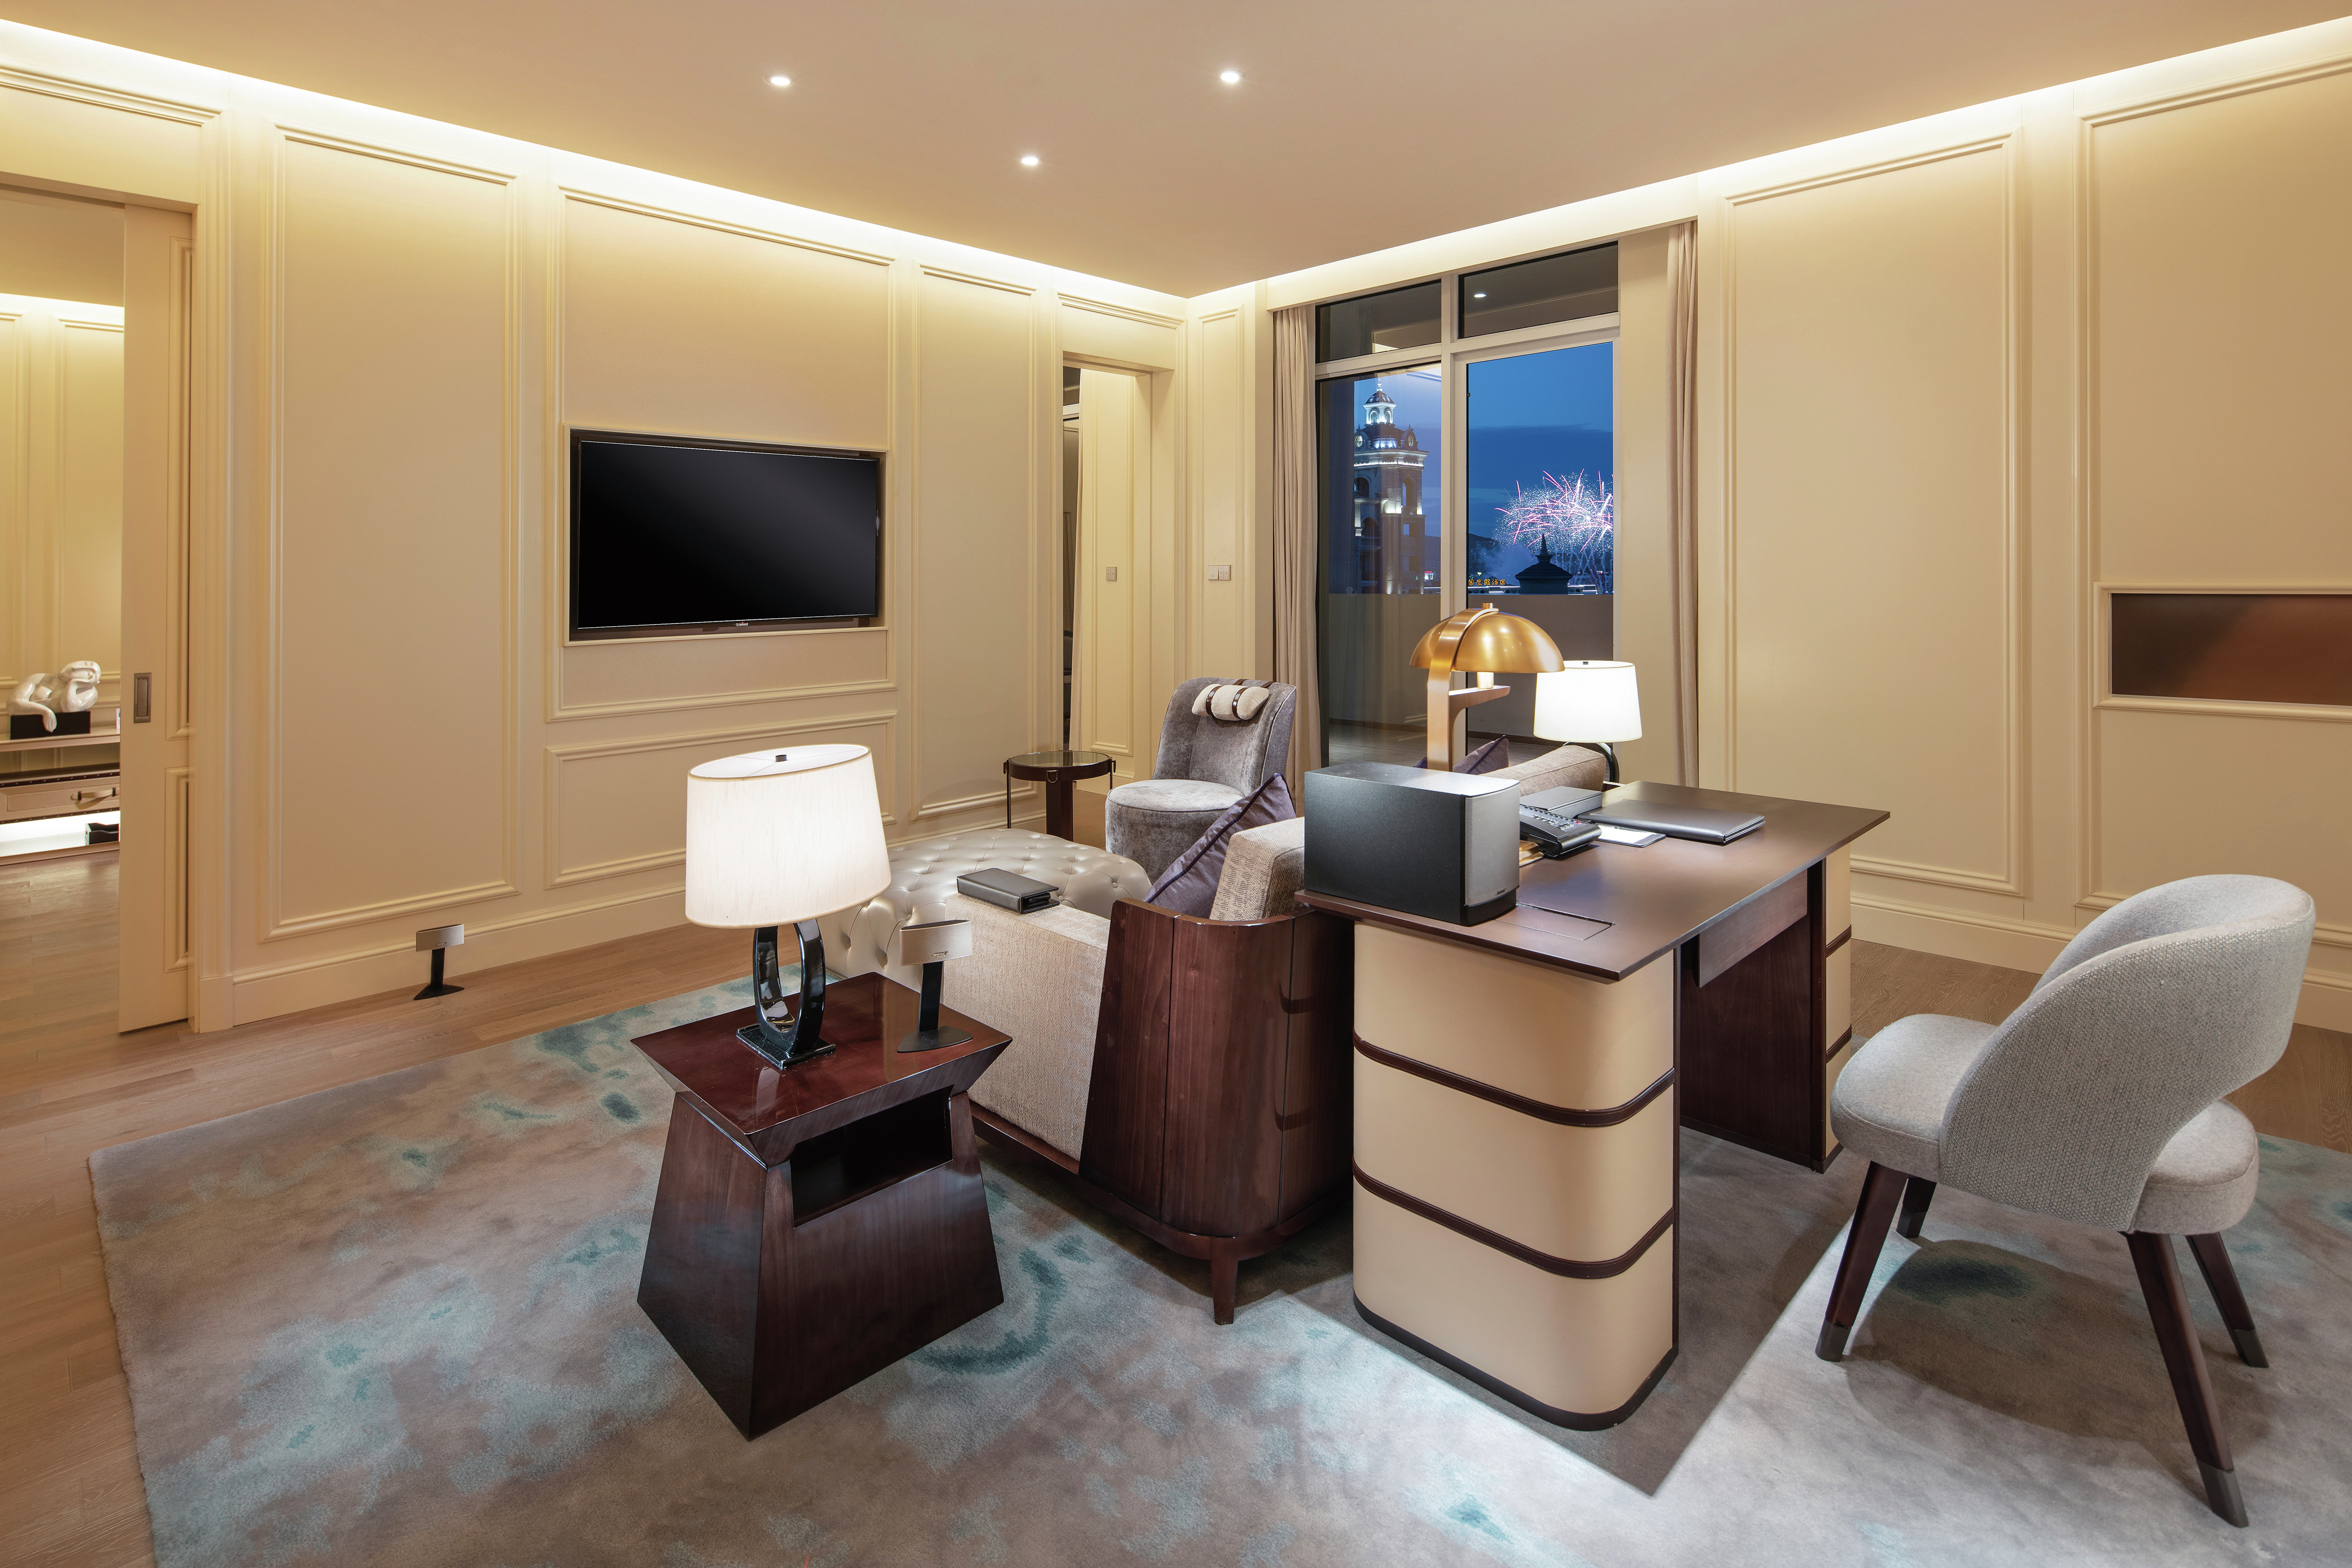 Work Desk, Chair, Lounge Area, and TV in Deluxe Suite Working Area